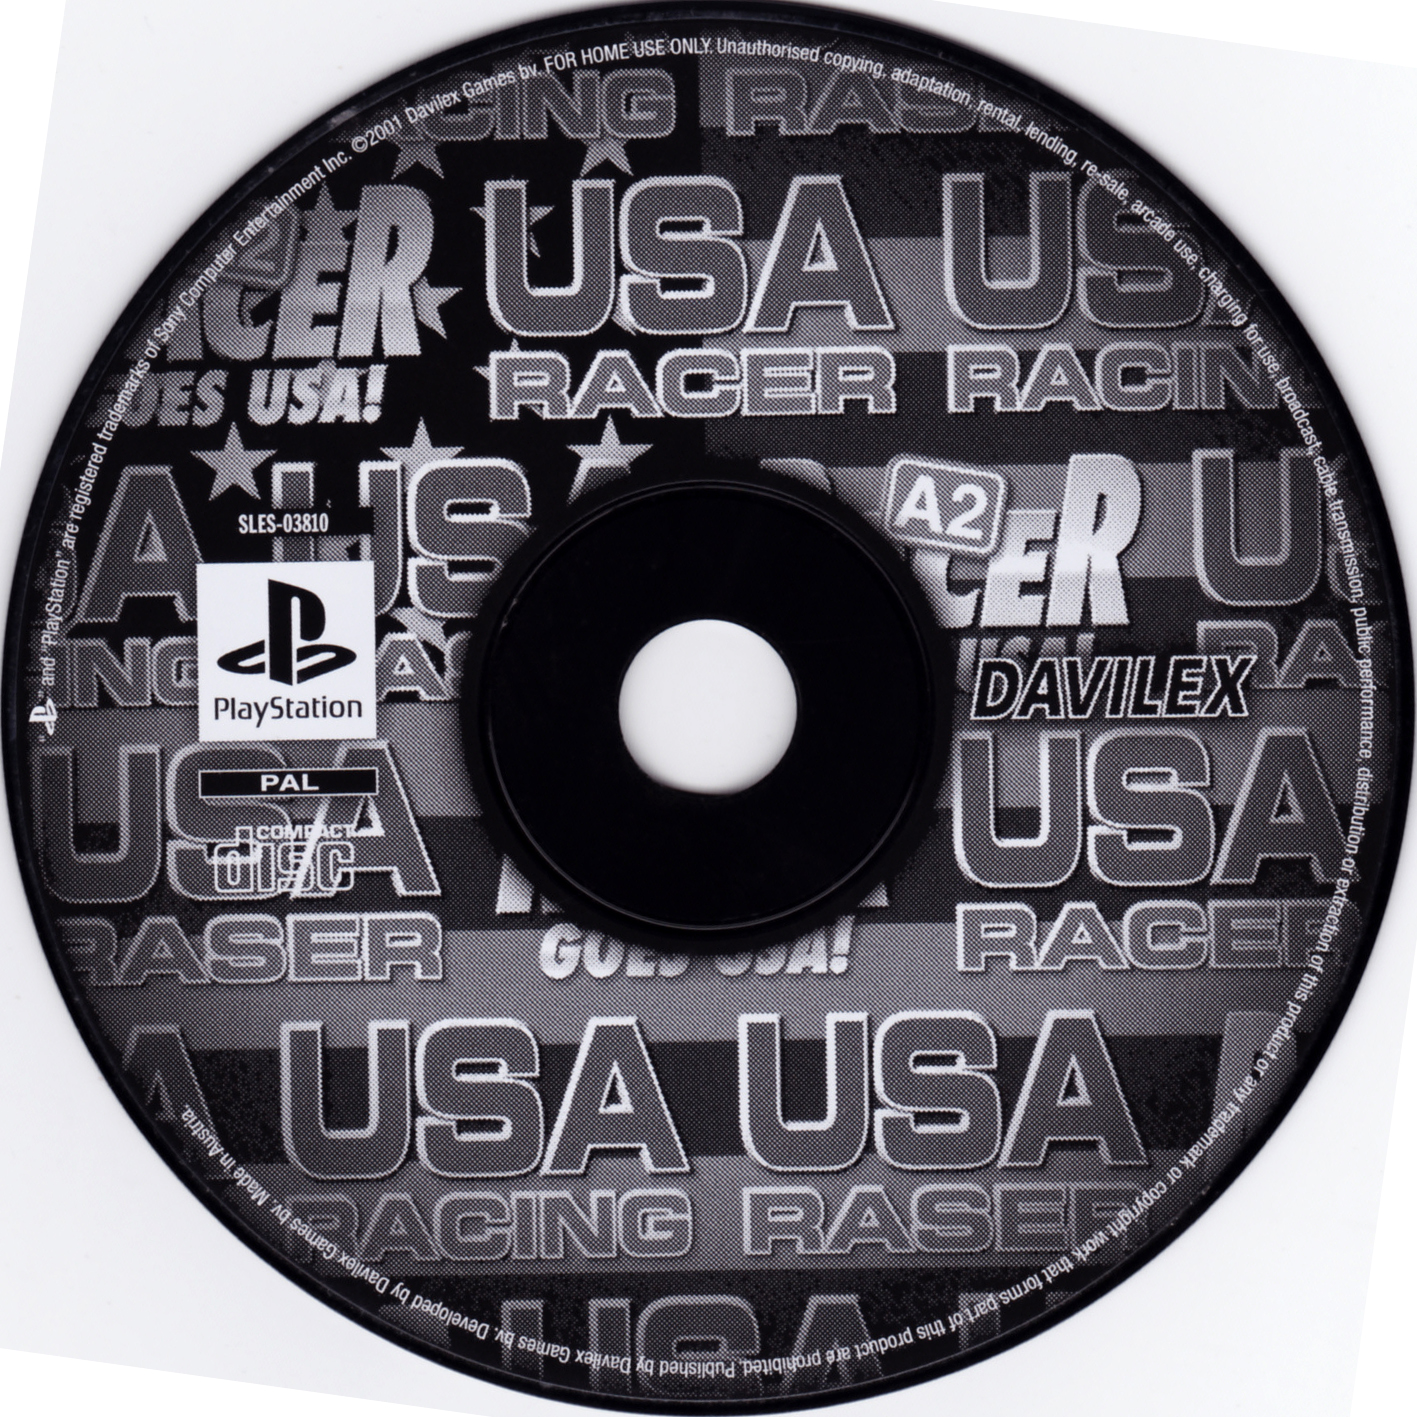 USA Racer PSX cover